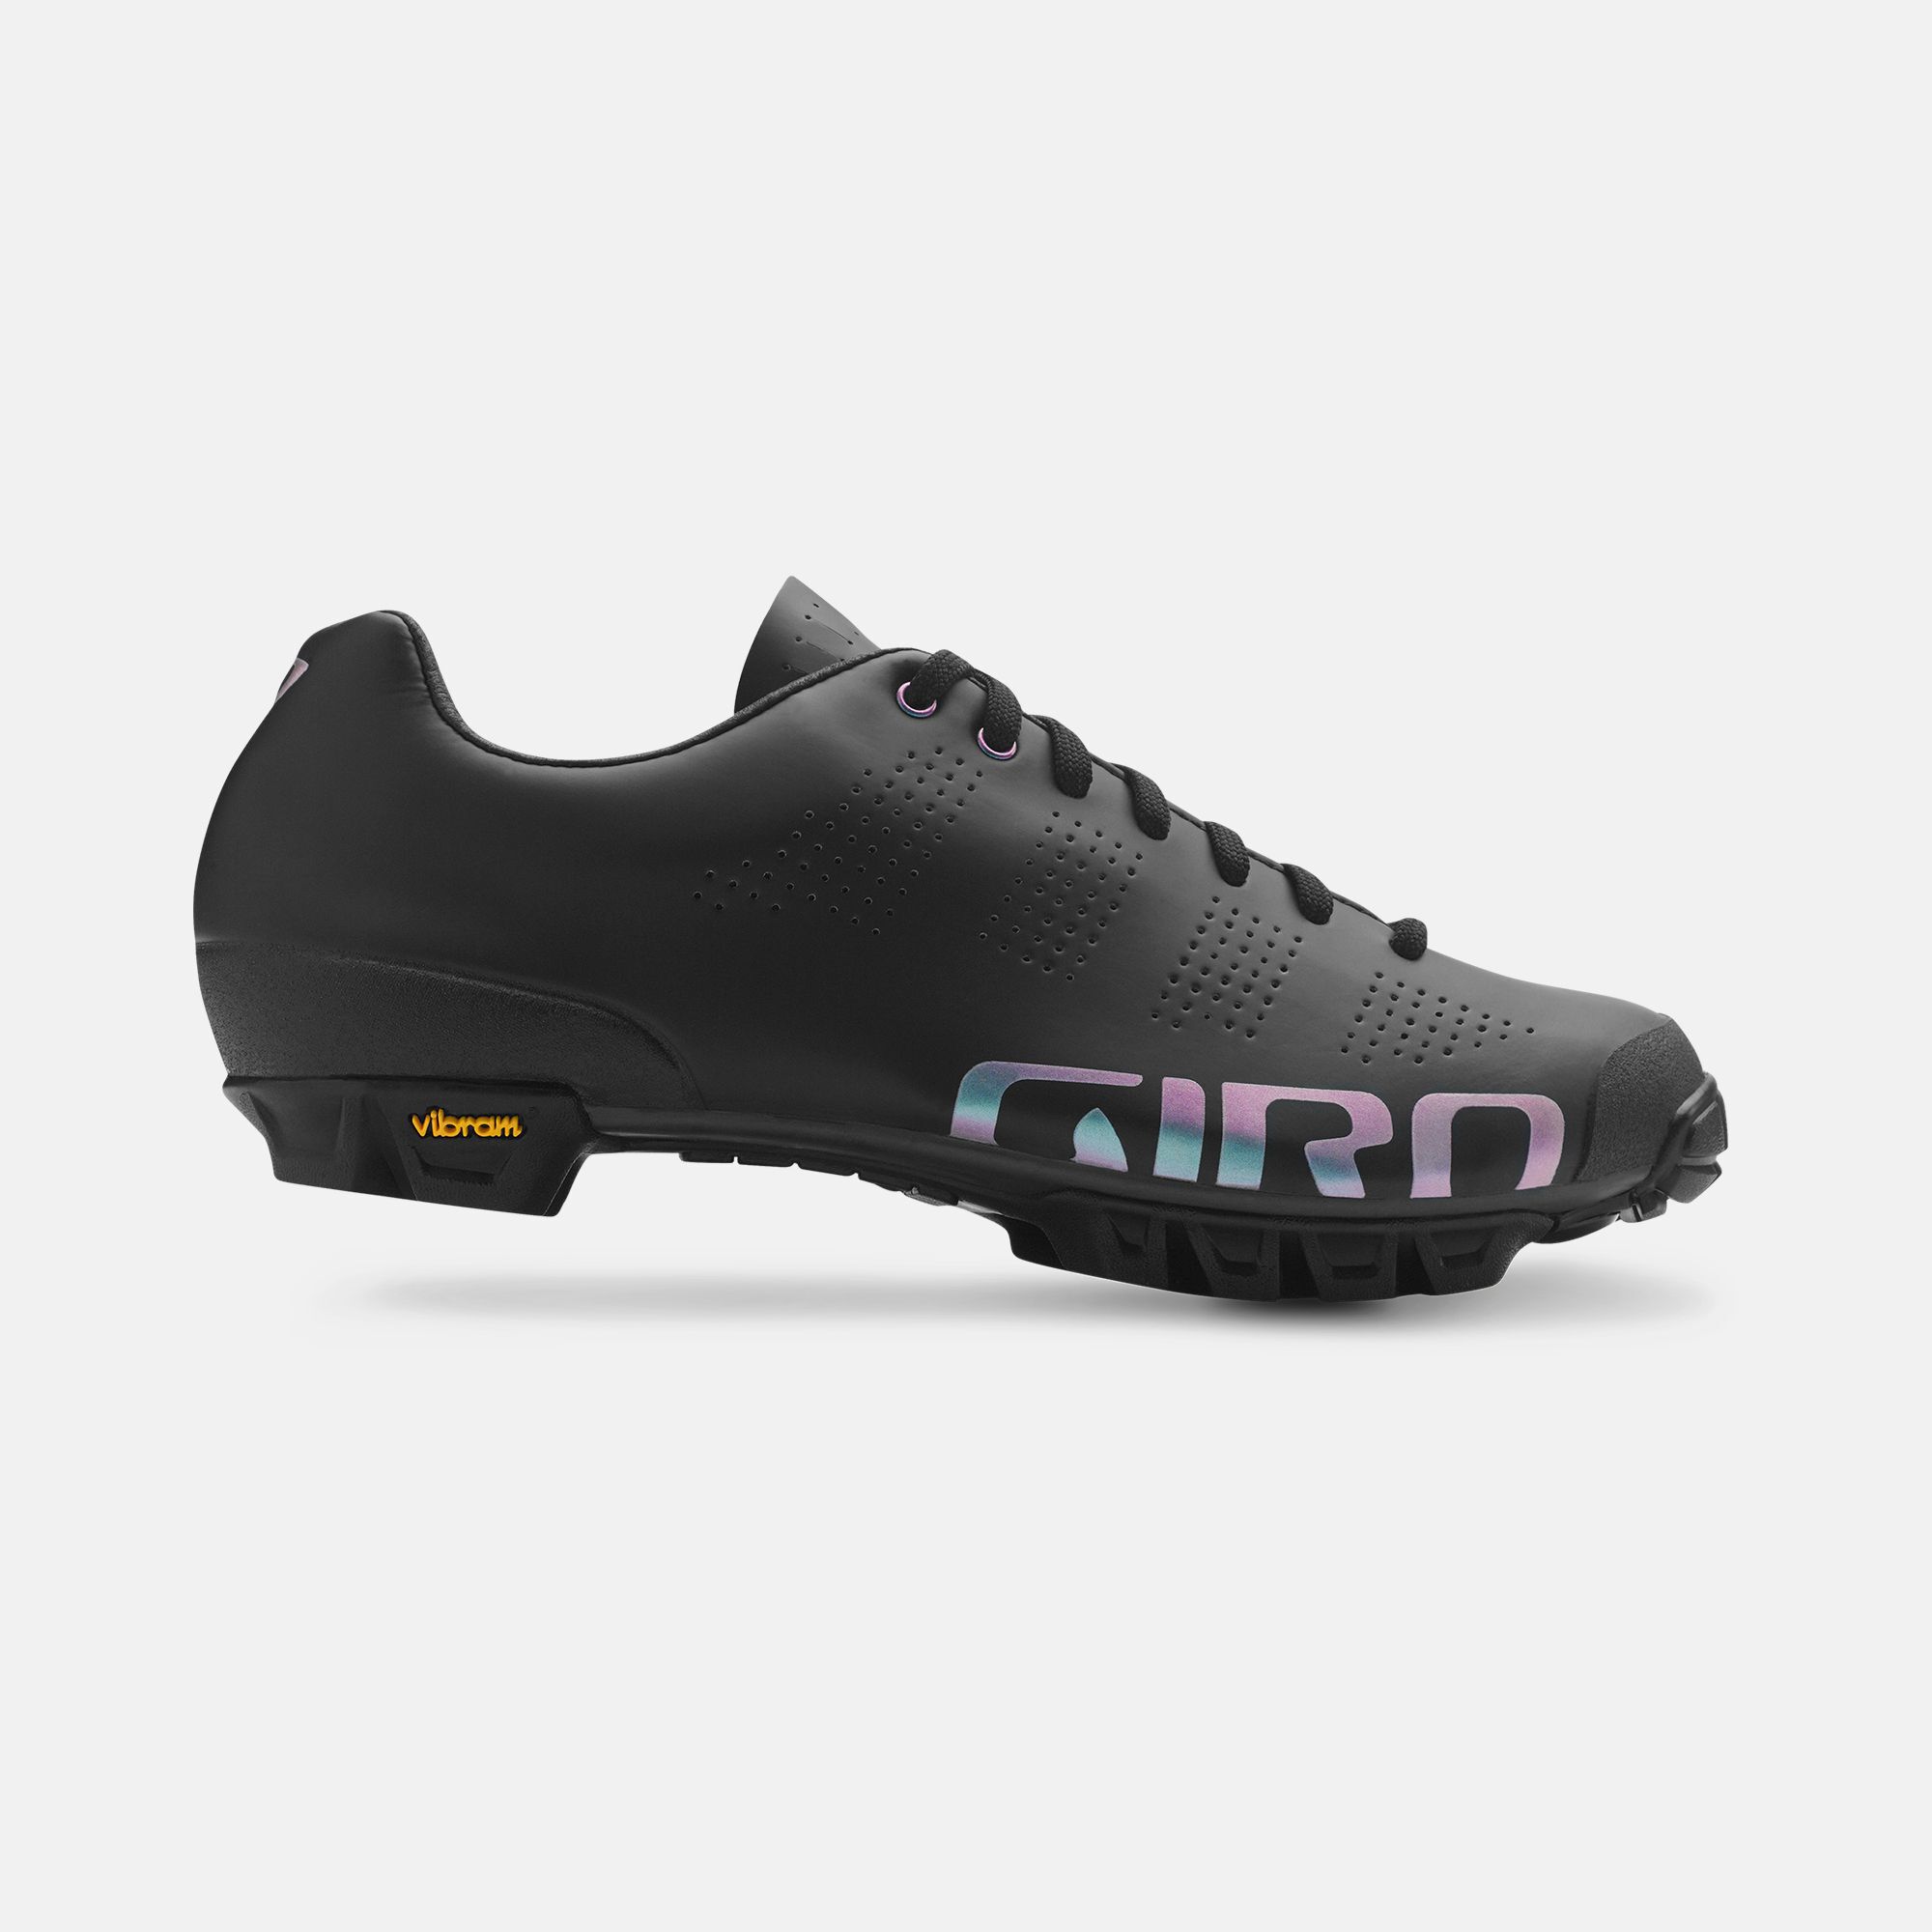 Details about   New RIGHT SINGLE SHOE Giro Empire VR90 MTB Cycling Bike 42.5 9.25 Silver Carbon